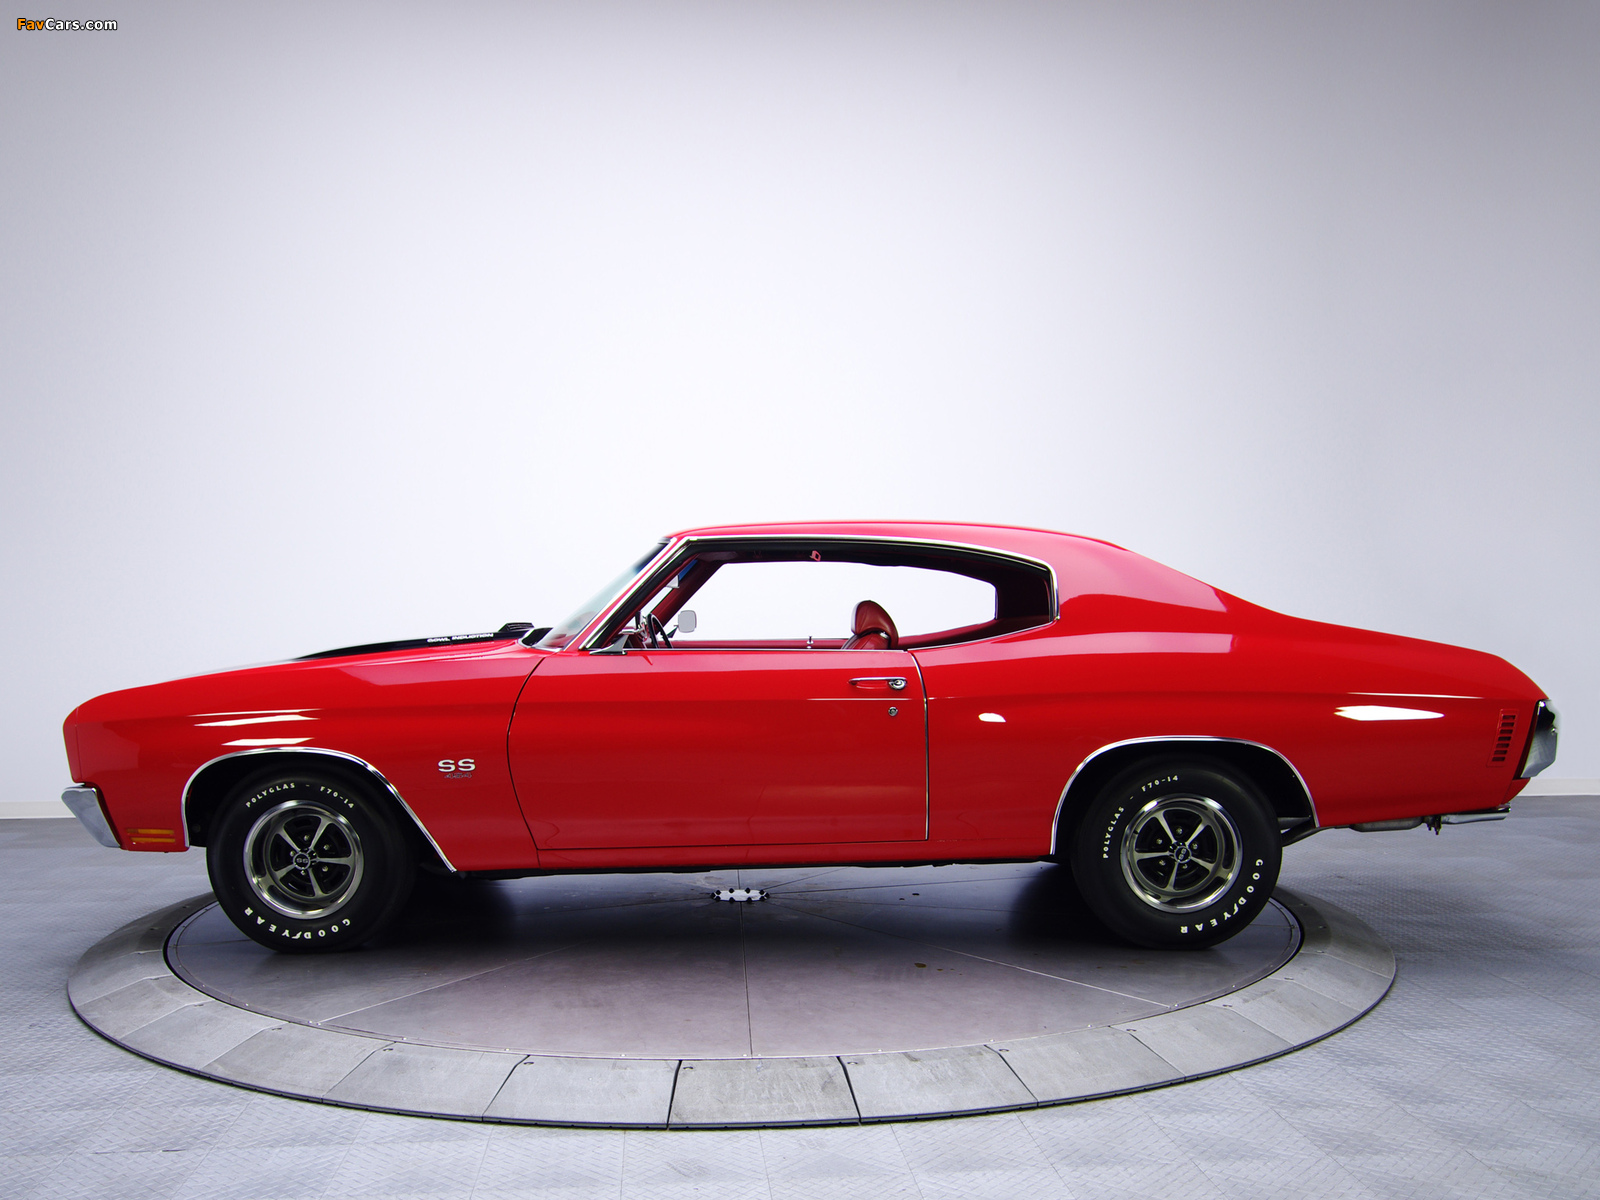 Pictures of Chevrolet Chevelle SS 396 Hardtop Coupe 1970 (1600 x 1200)